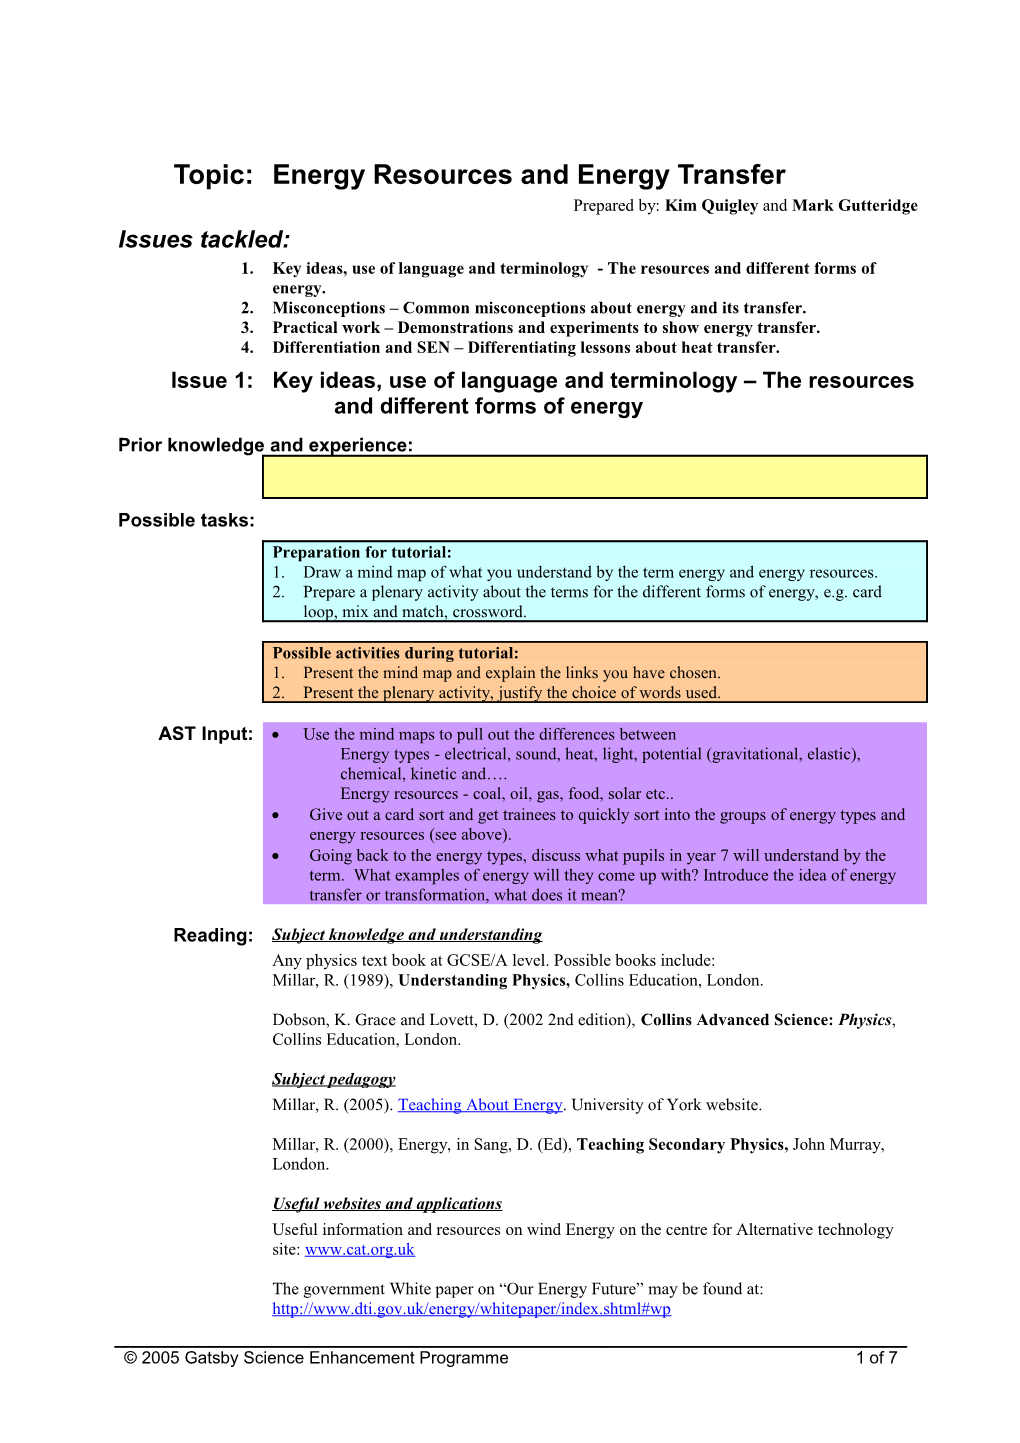 Energy Resources and Energy Transfer